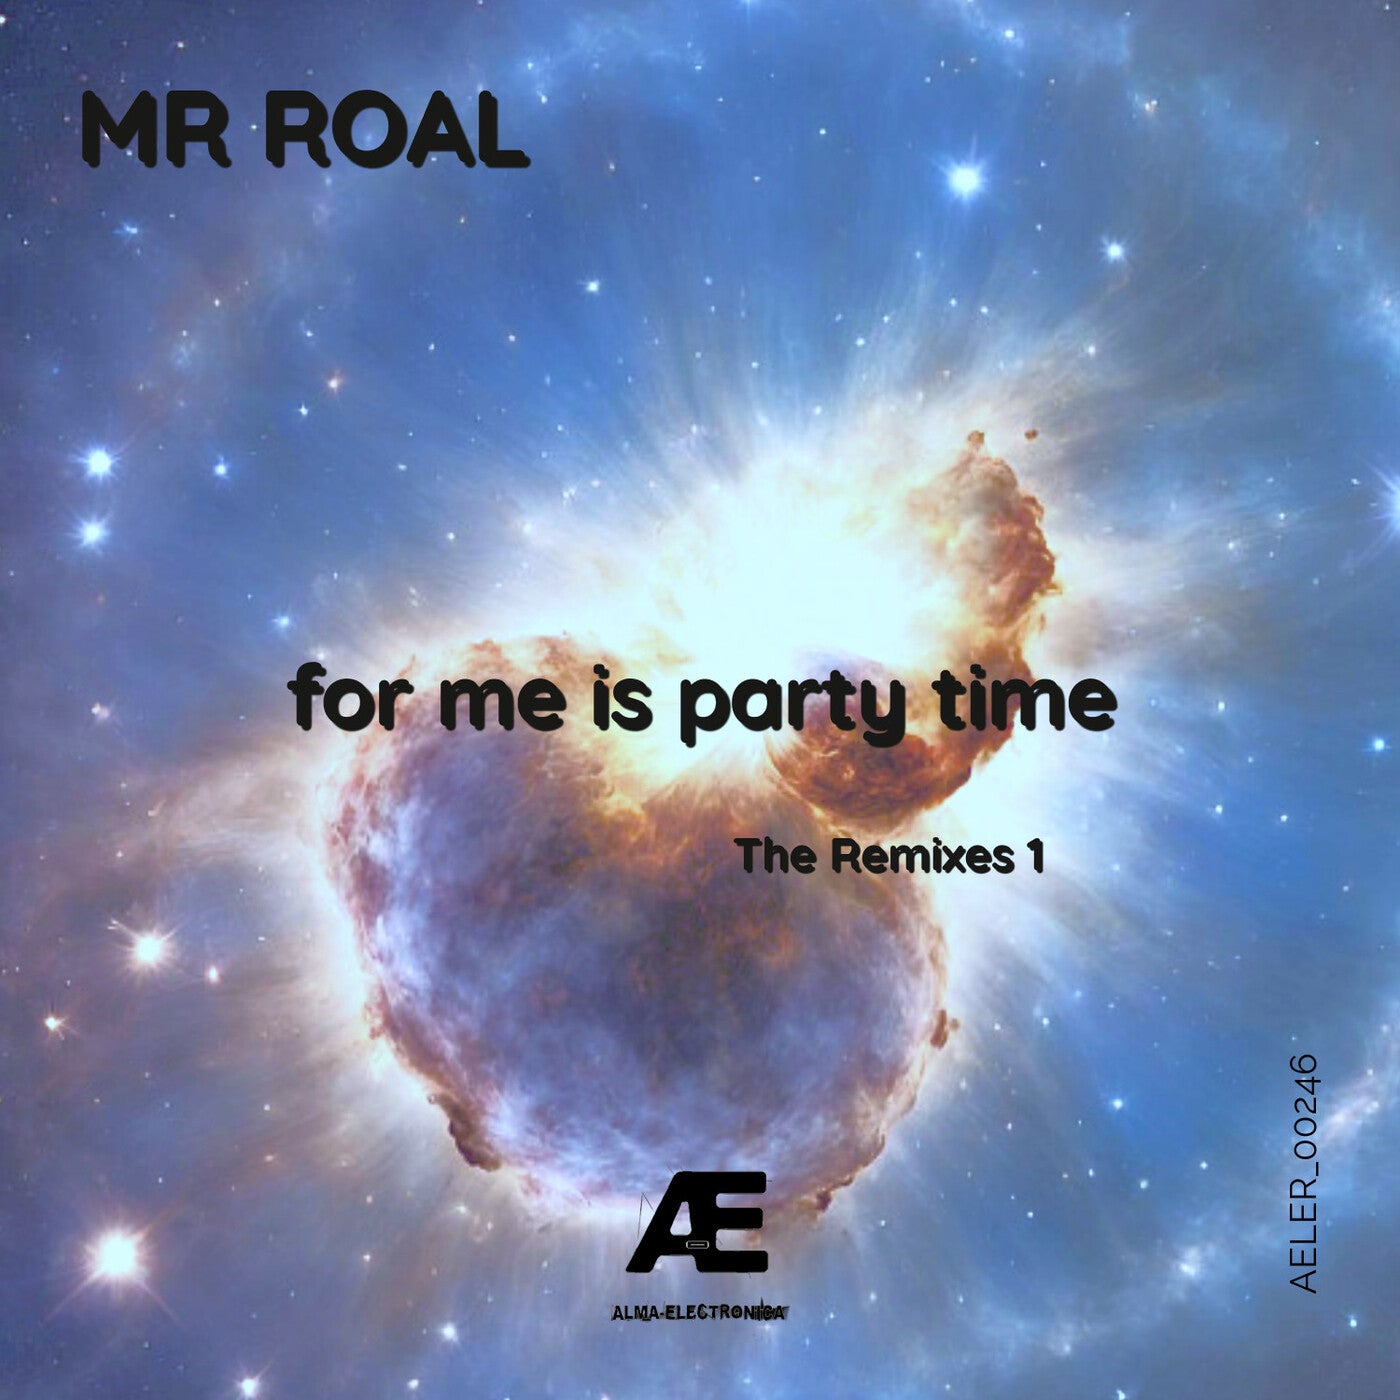 for me is party time (The Remixes 1)